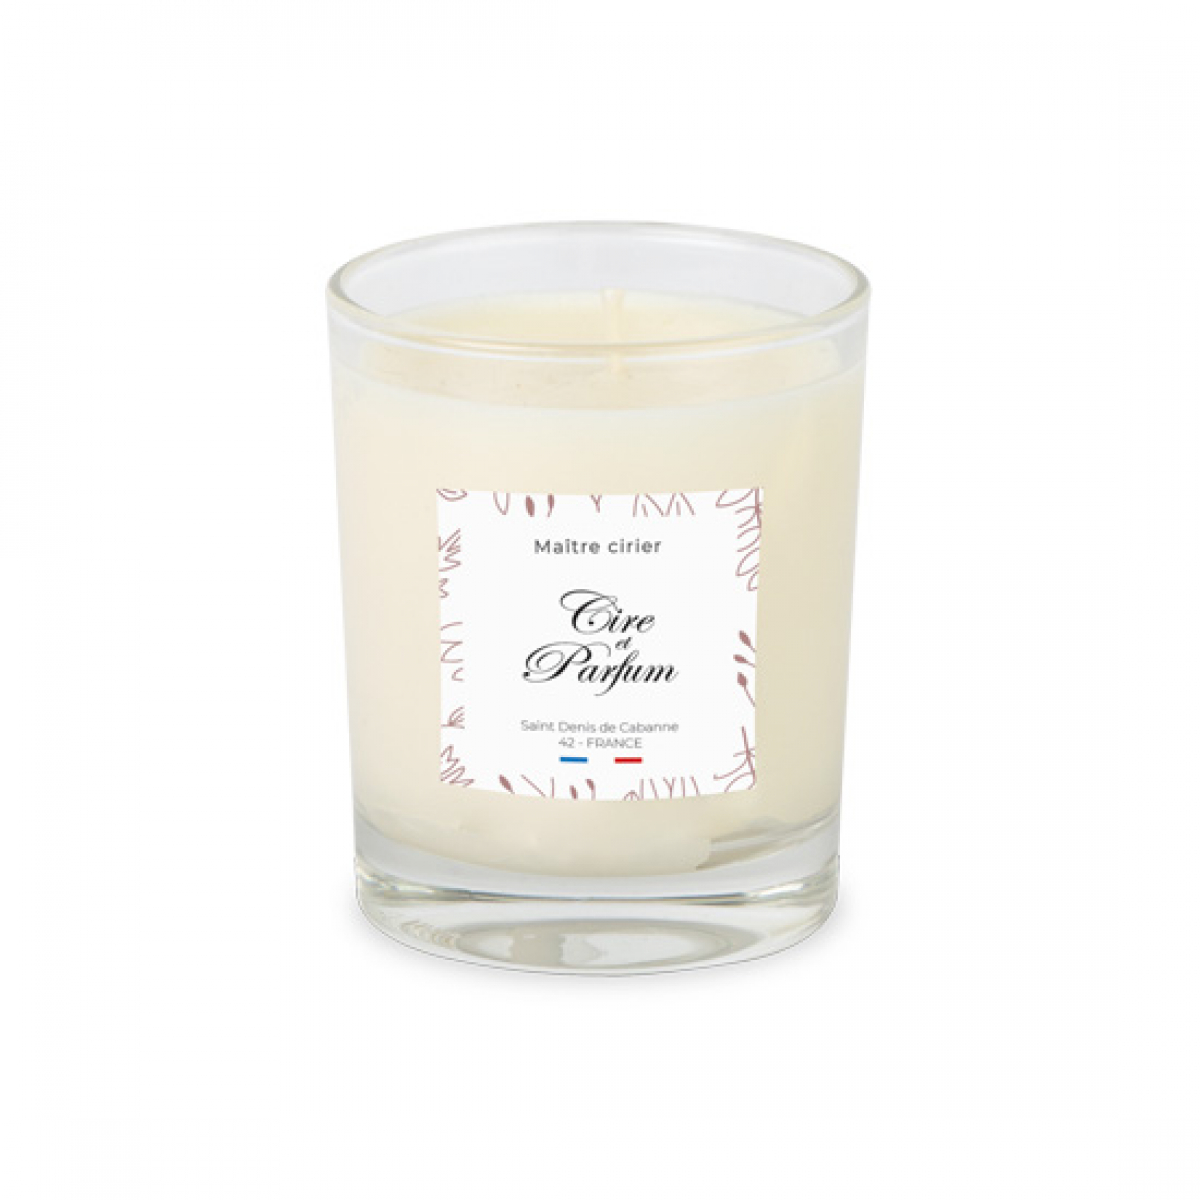 Amour toujours - scented candle